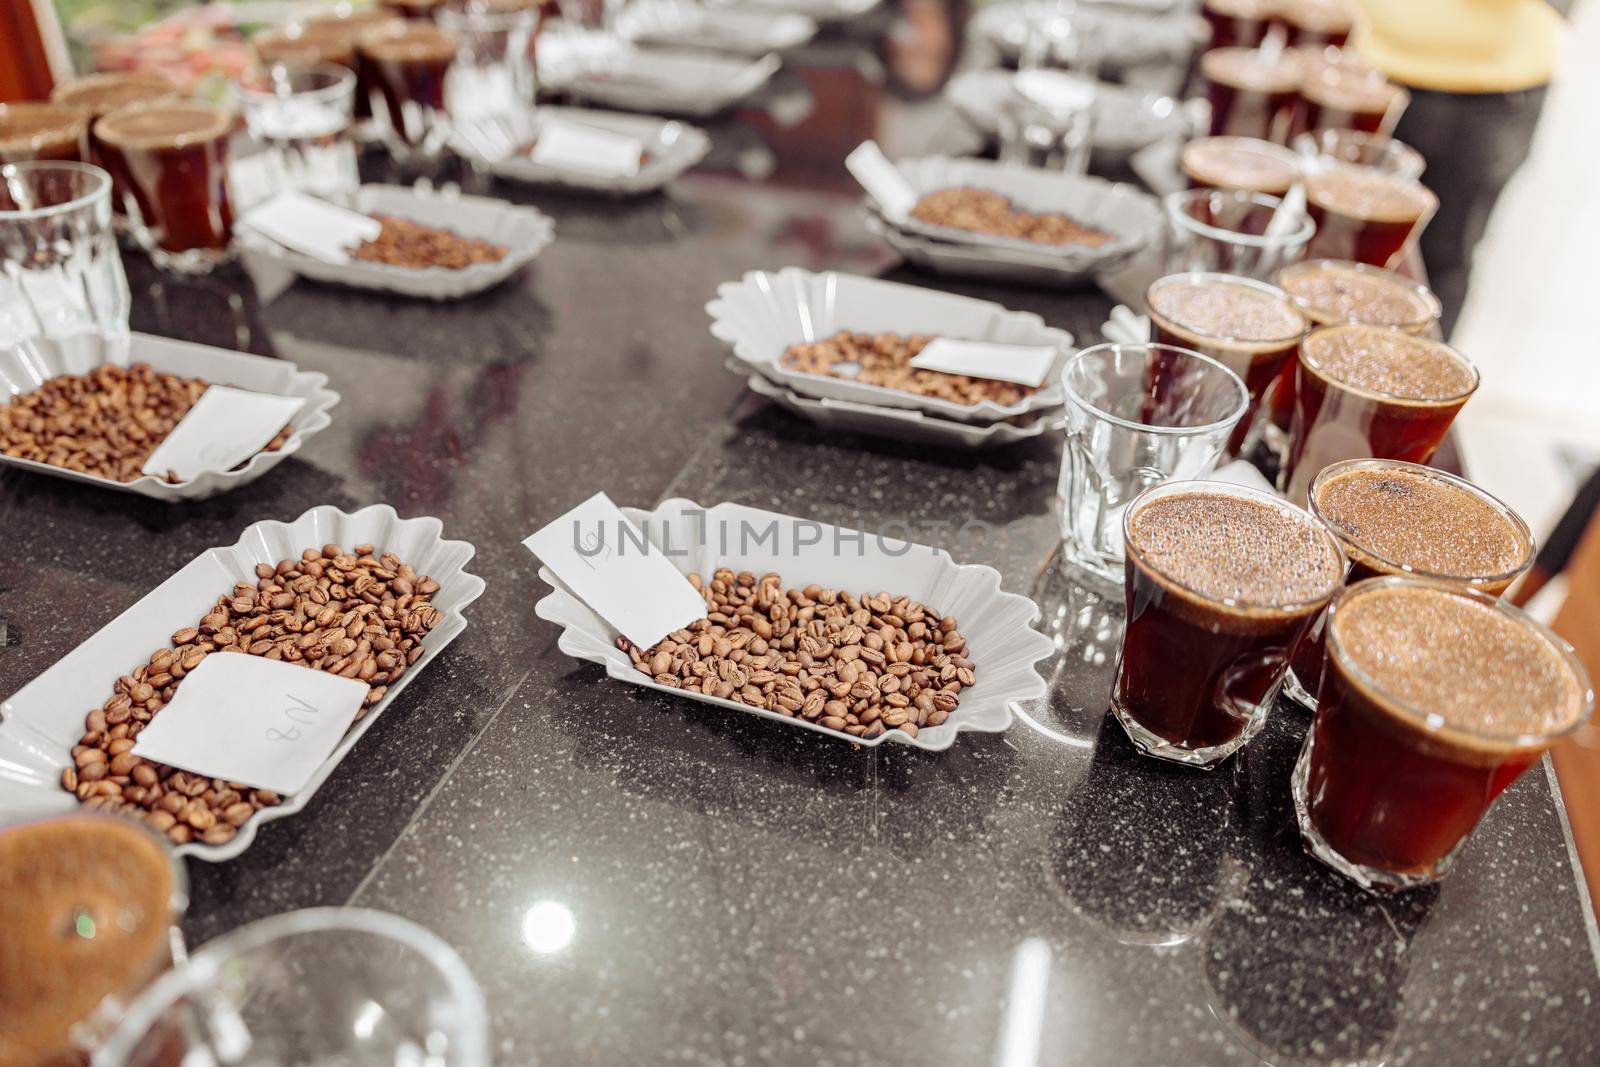 Coffee glasses and beans on table ready for a tasting indoors by Yaroslav_astakhov